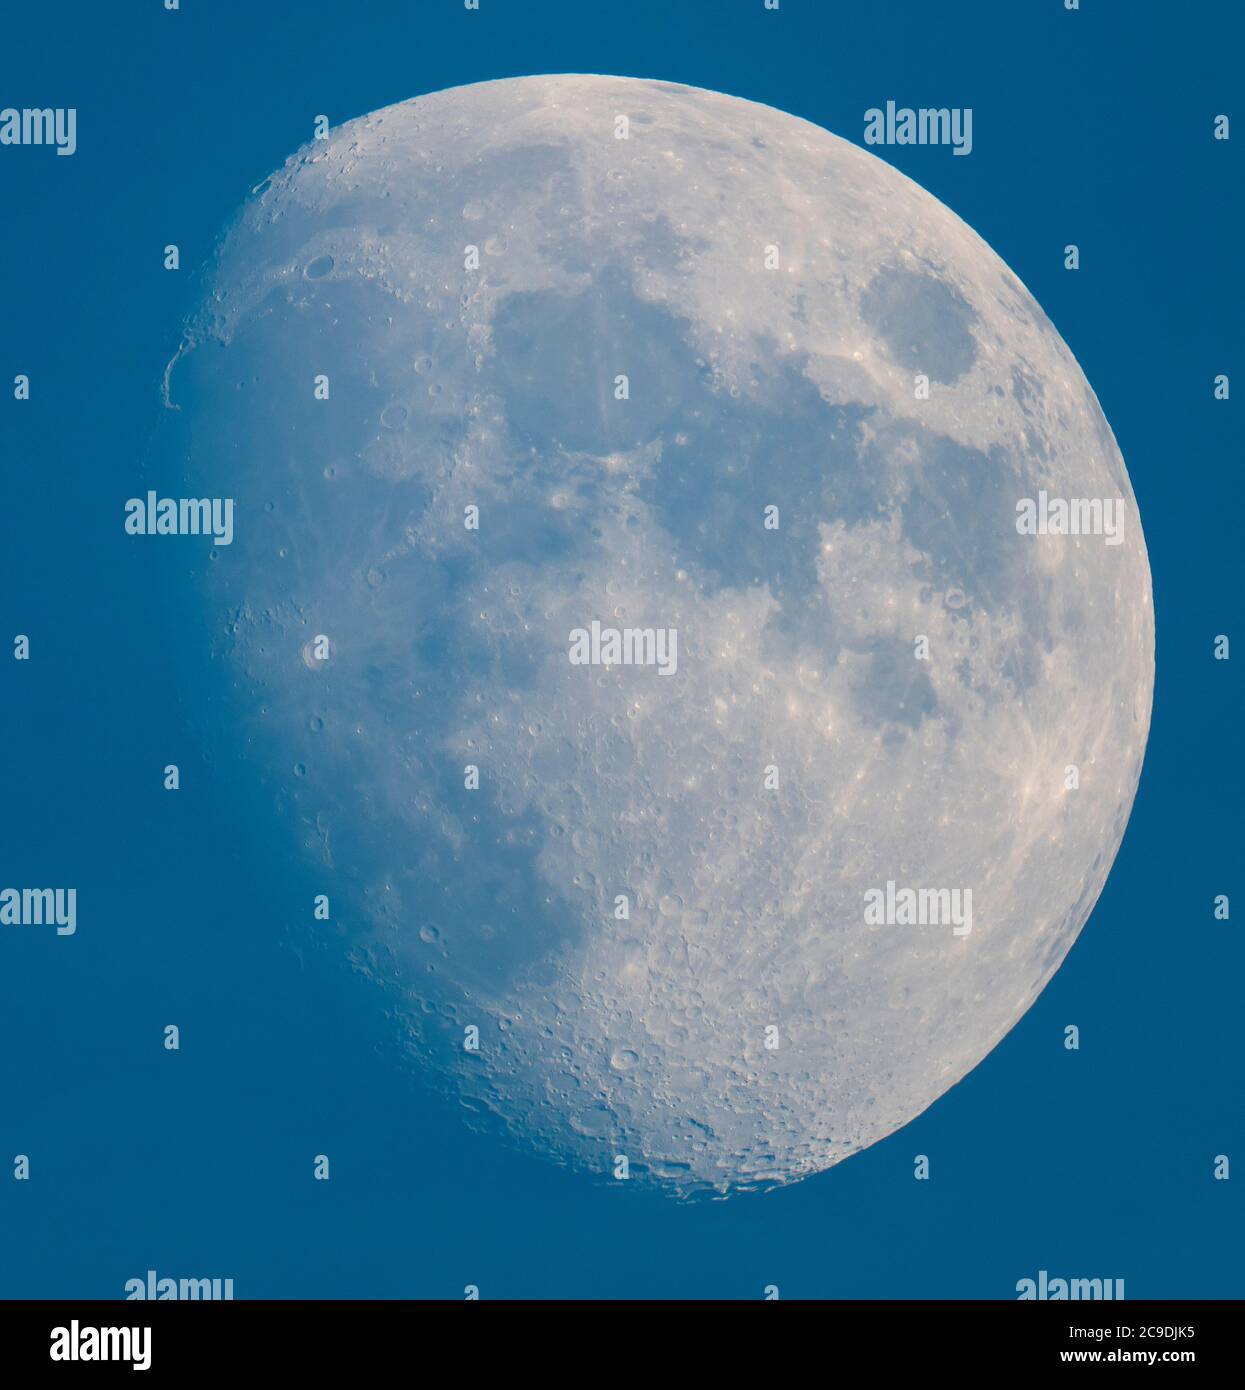 London, UK. 30 July 2020. An 84% illuminated Waxing Gibbous Moon above London in blue sky and a clear atmosphere, photographed through a telescope, showing crater detail on the south lunar pole. Credit: Malcolm Park/Alamy Live News Stock Photo